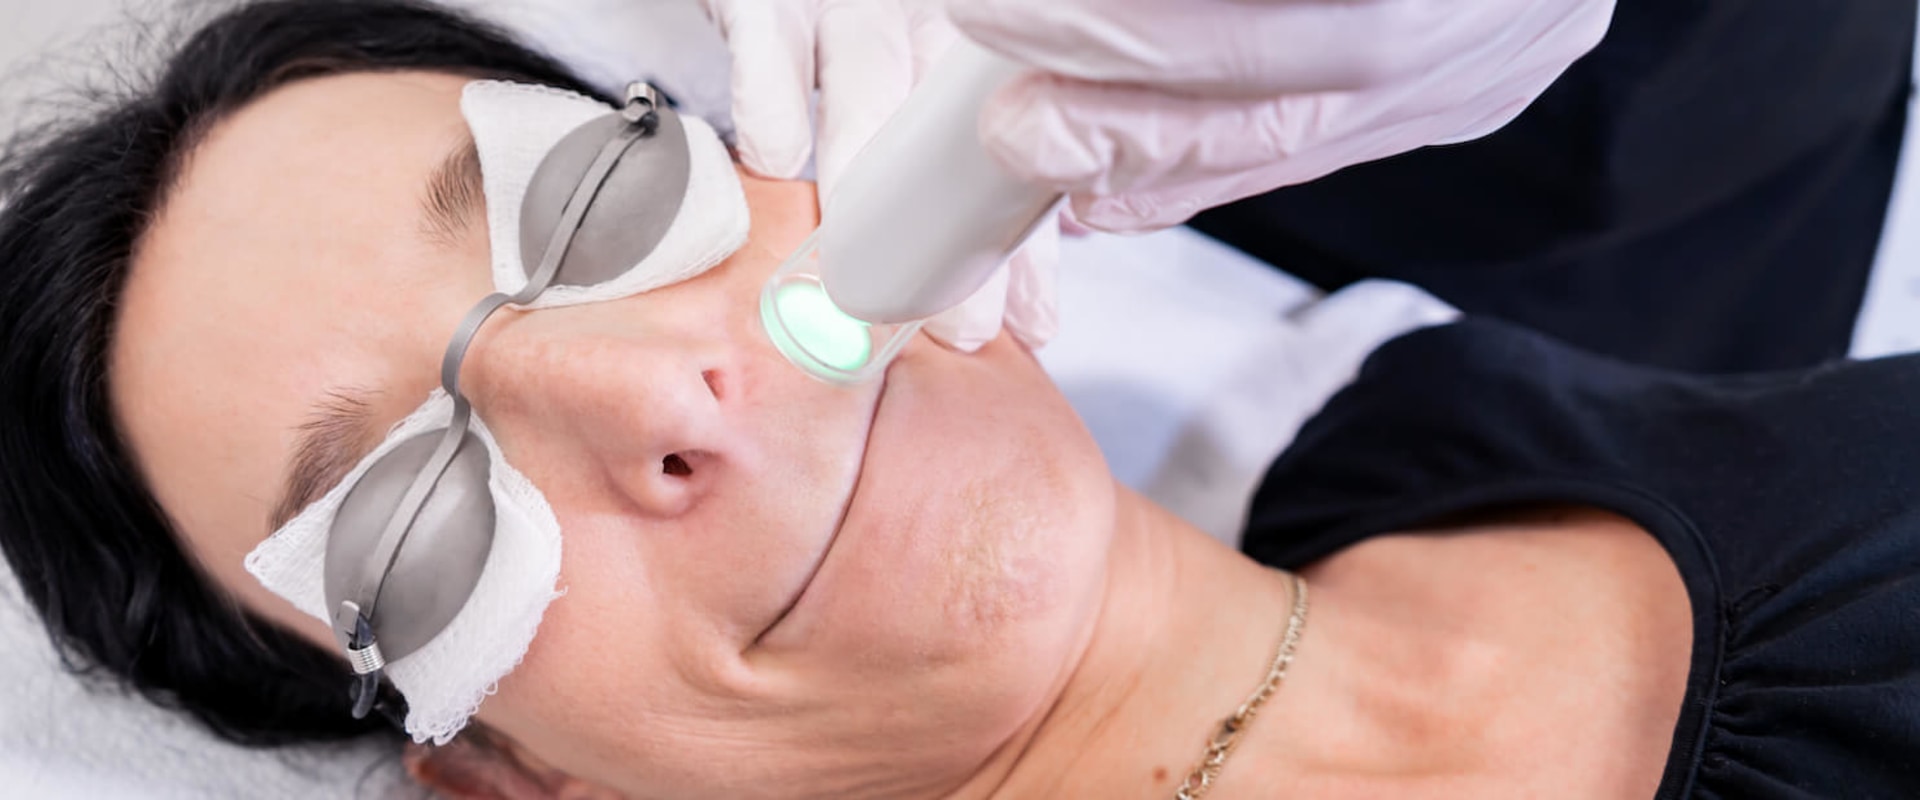 Can Laser Hair Removal Permanently Remove Upper Lip Hair?